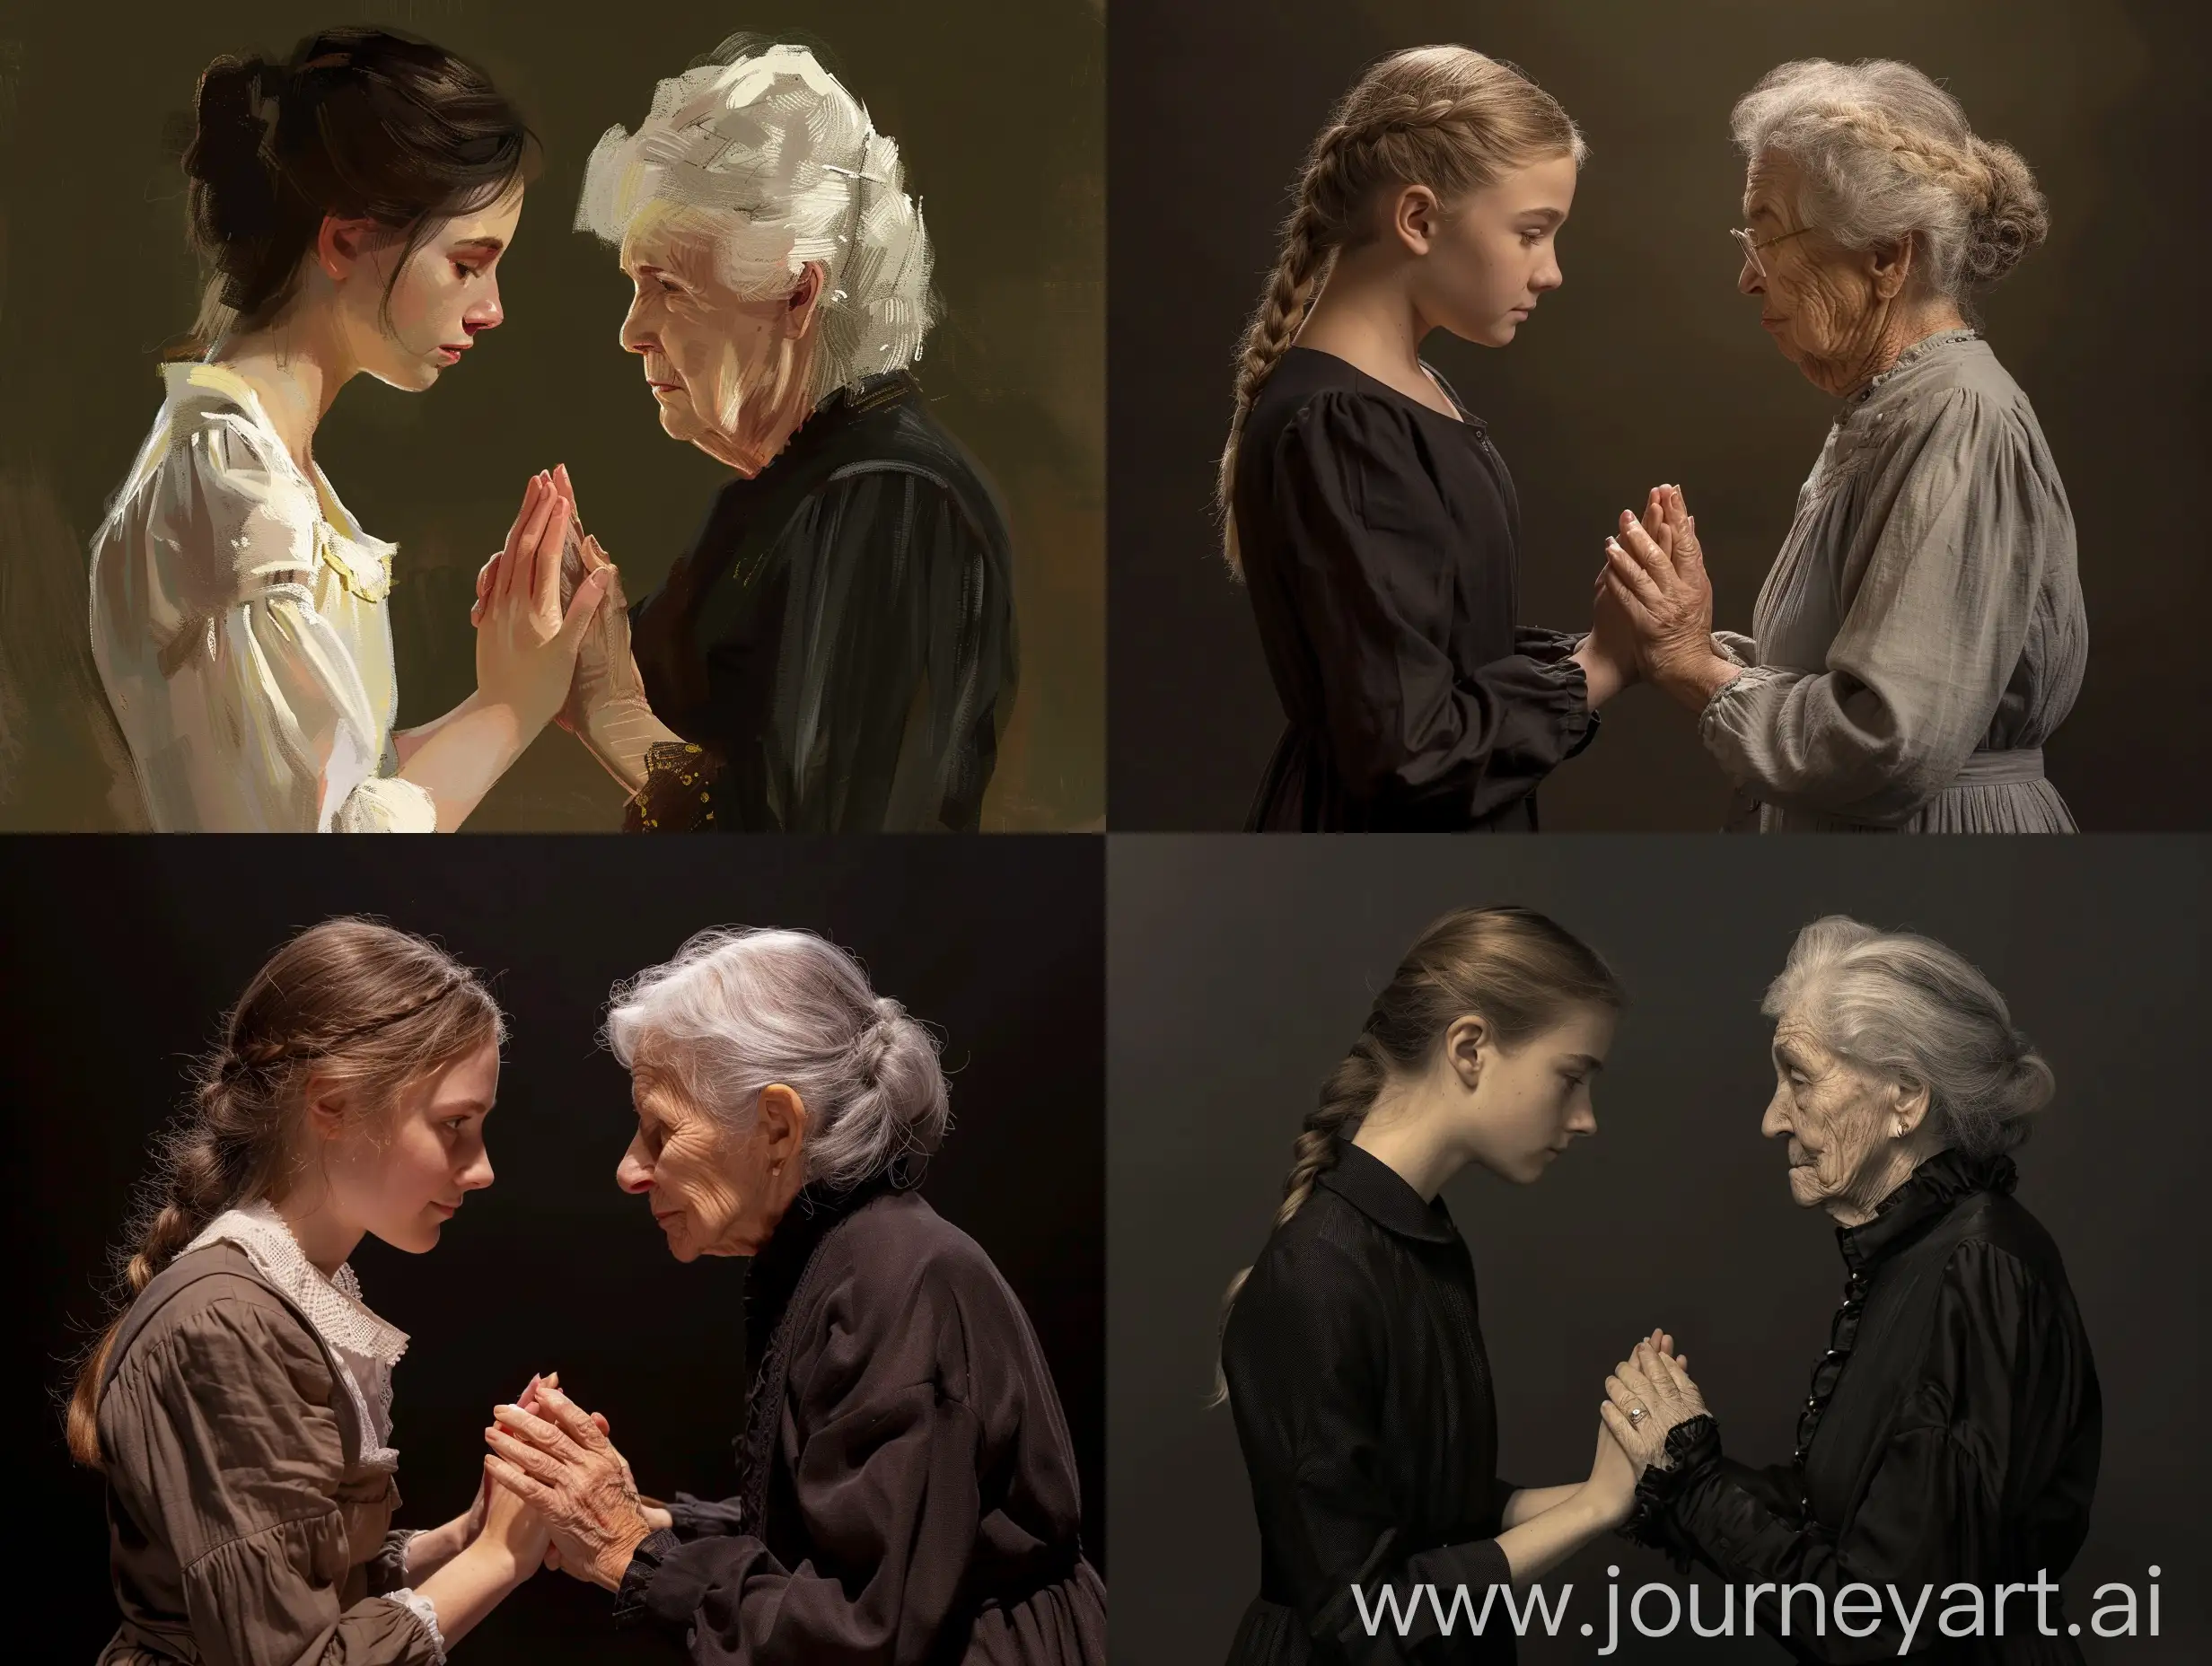 Create an image of 17-year-old Elizabeth Elliot, praying with the elderly Mrs. Cunningham, facing each other holding hands. create them with European ethnic characteristics.